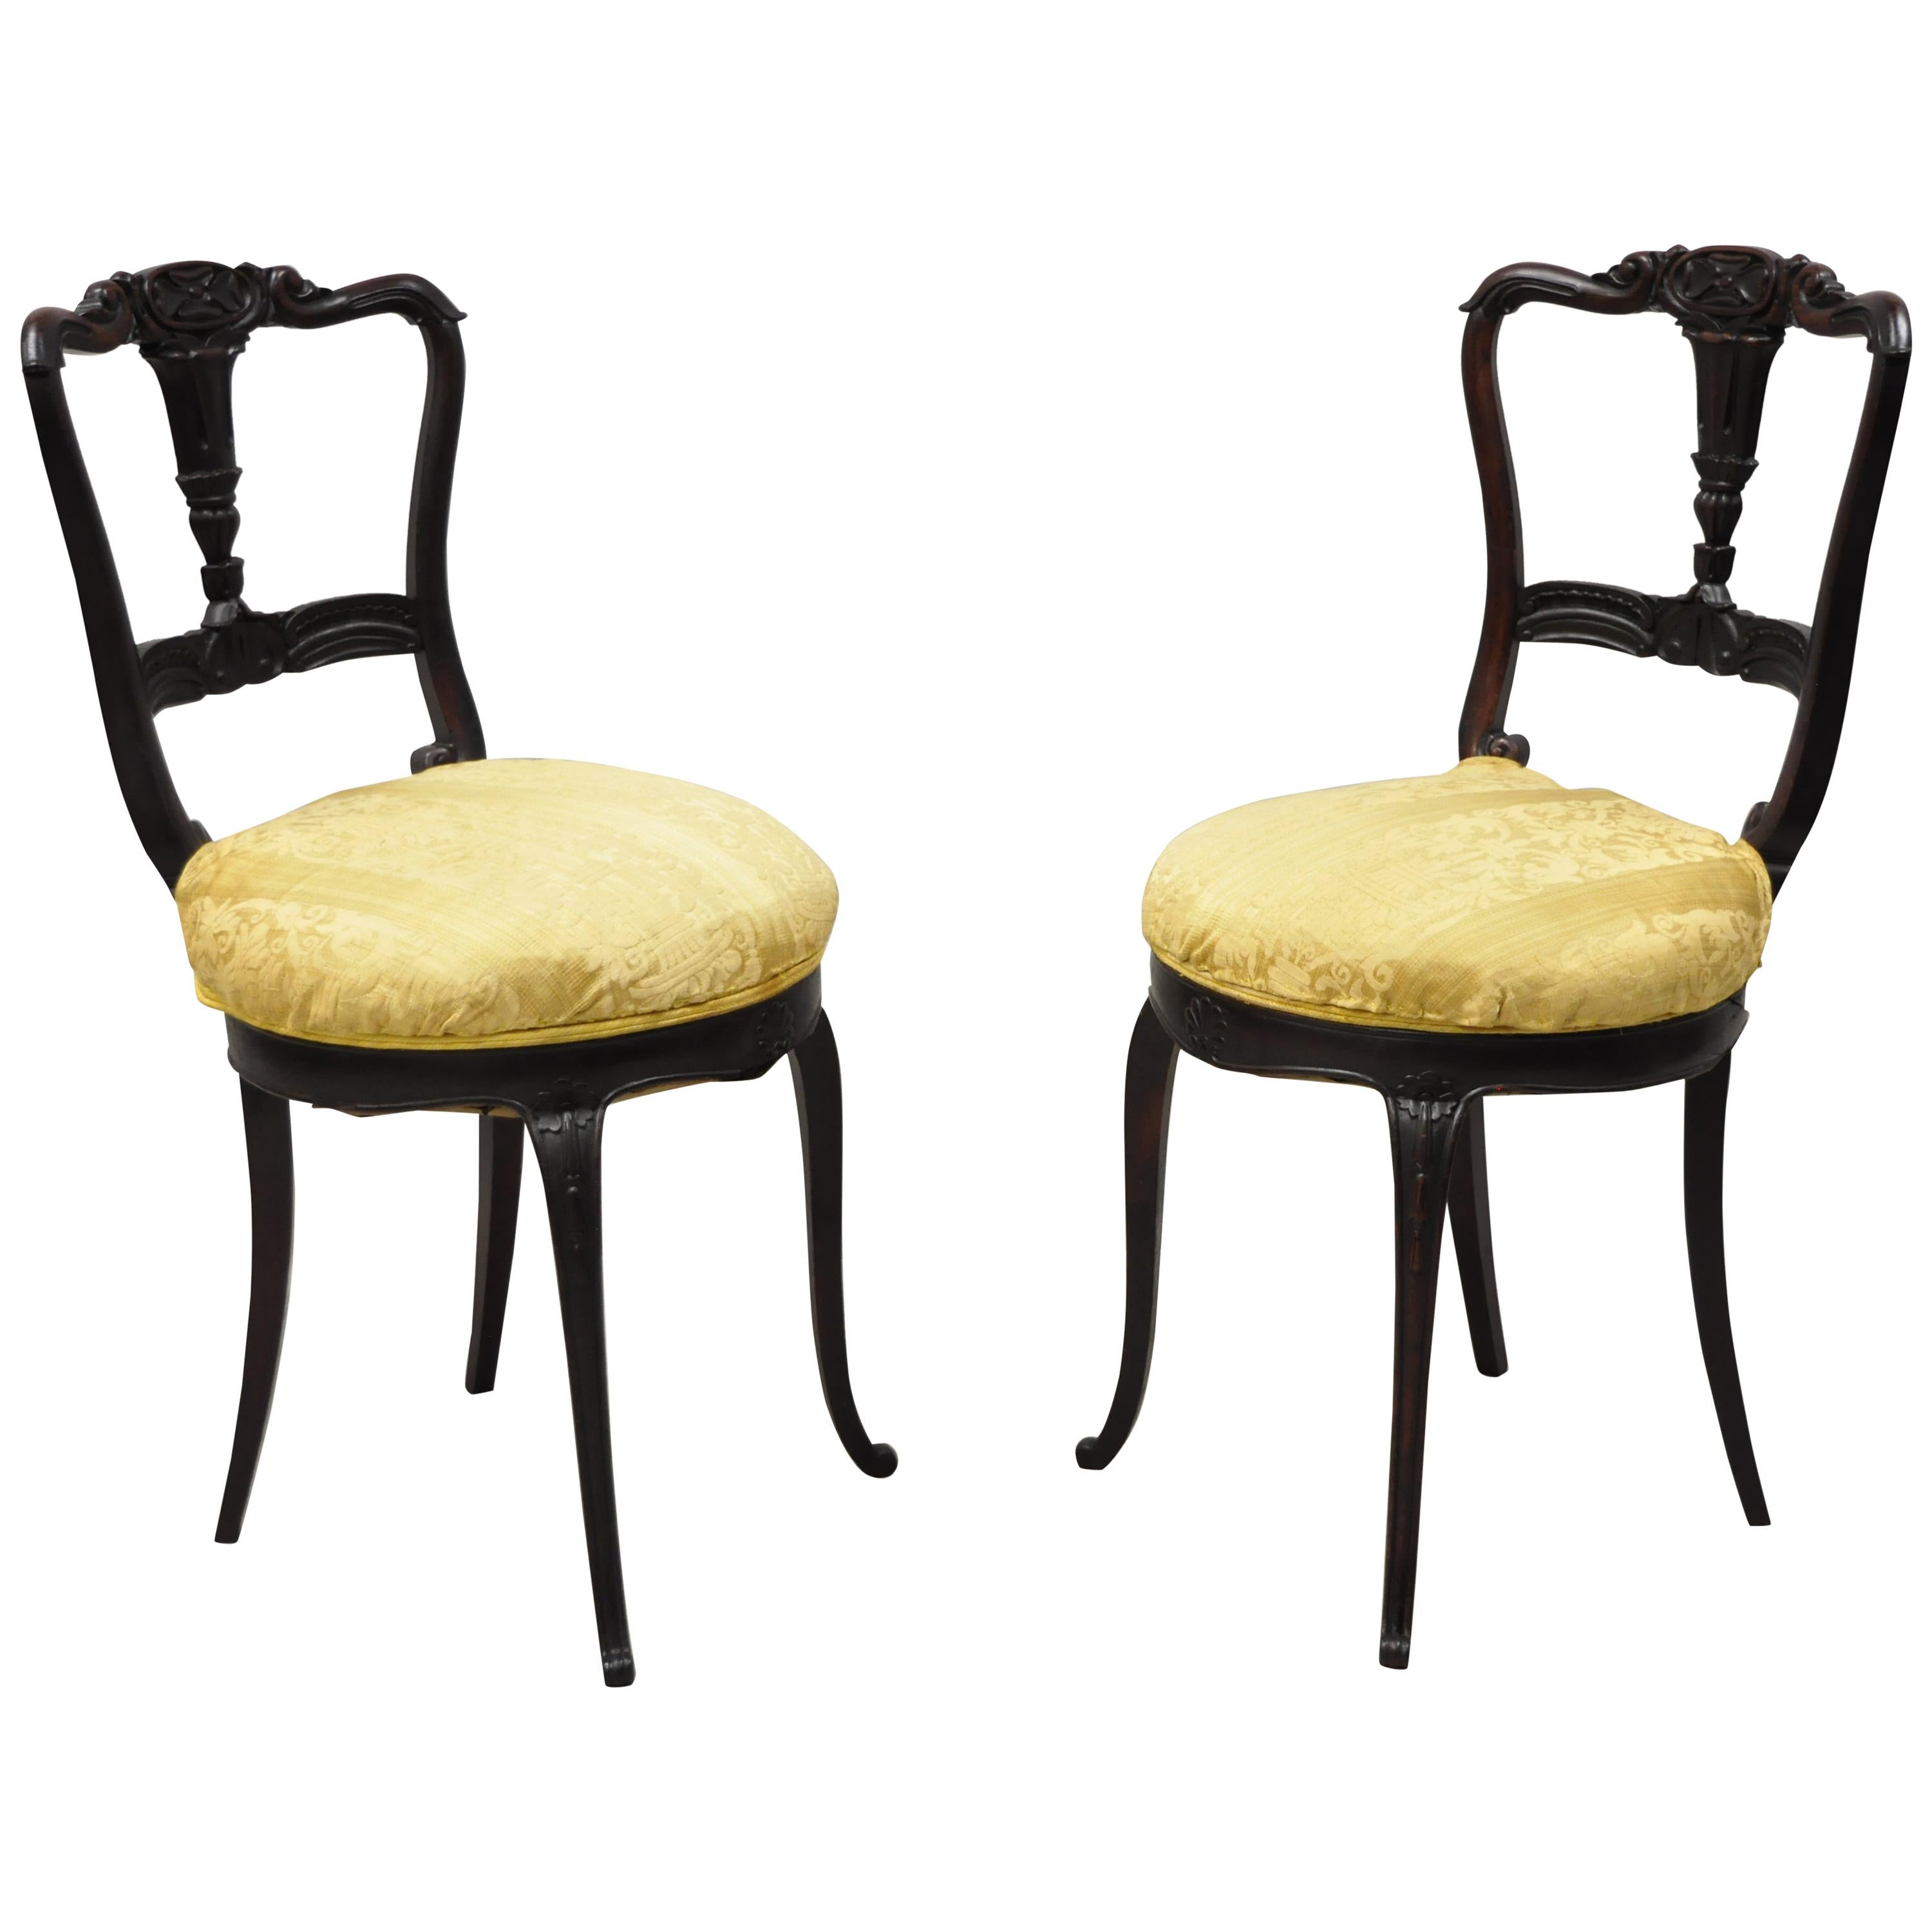 Antique French Victorian Carved Rosewood Small Petite Accent Side Chairs, Pair For Sale